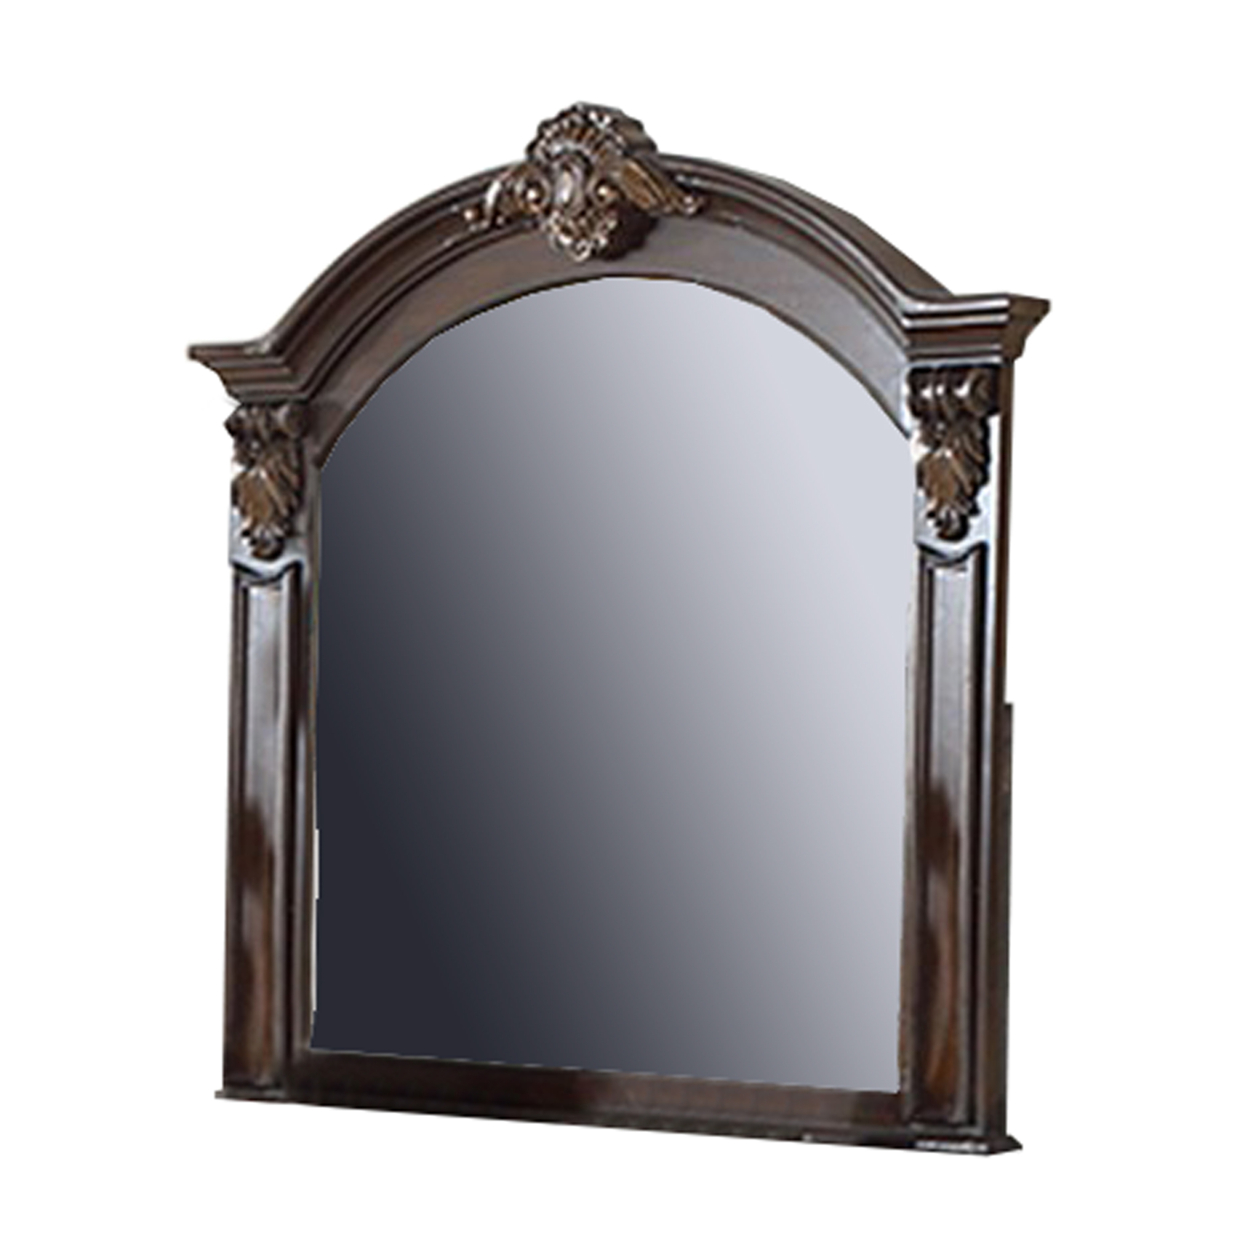 Scalloped Crown Top Wooden Frame Wall Mirror With Molded Details, Brown- Saltoro Sherpi